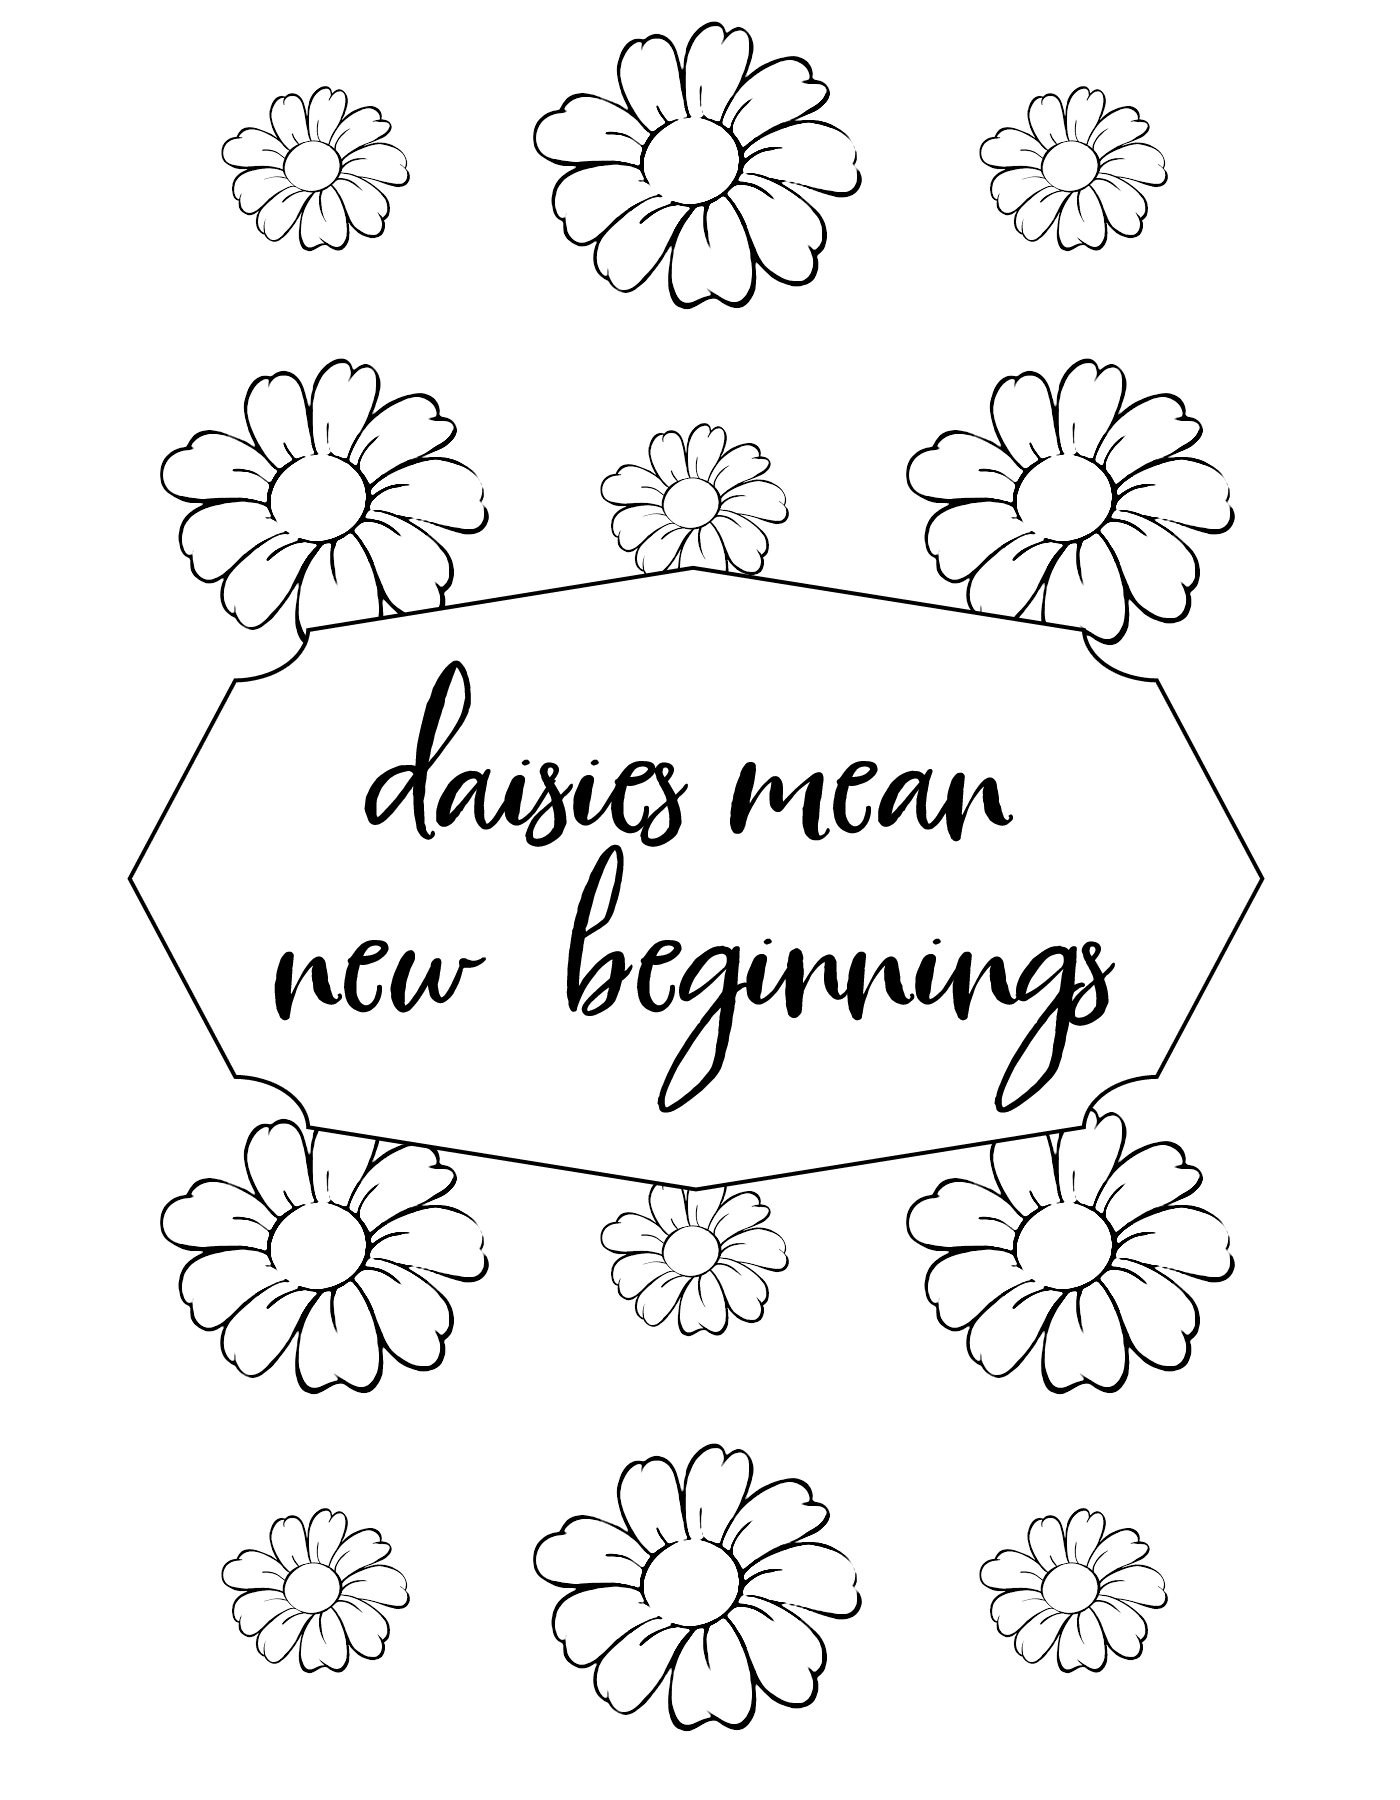 New Beginnings Daisy Coloring Pages